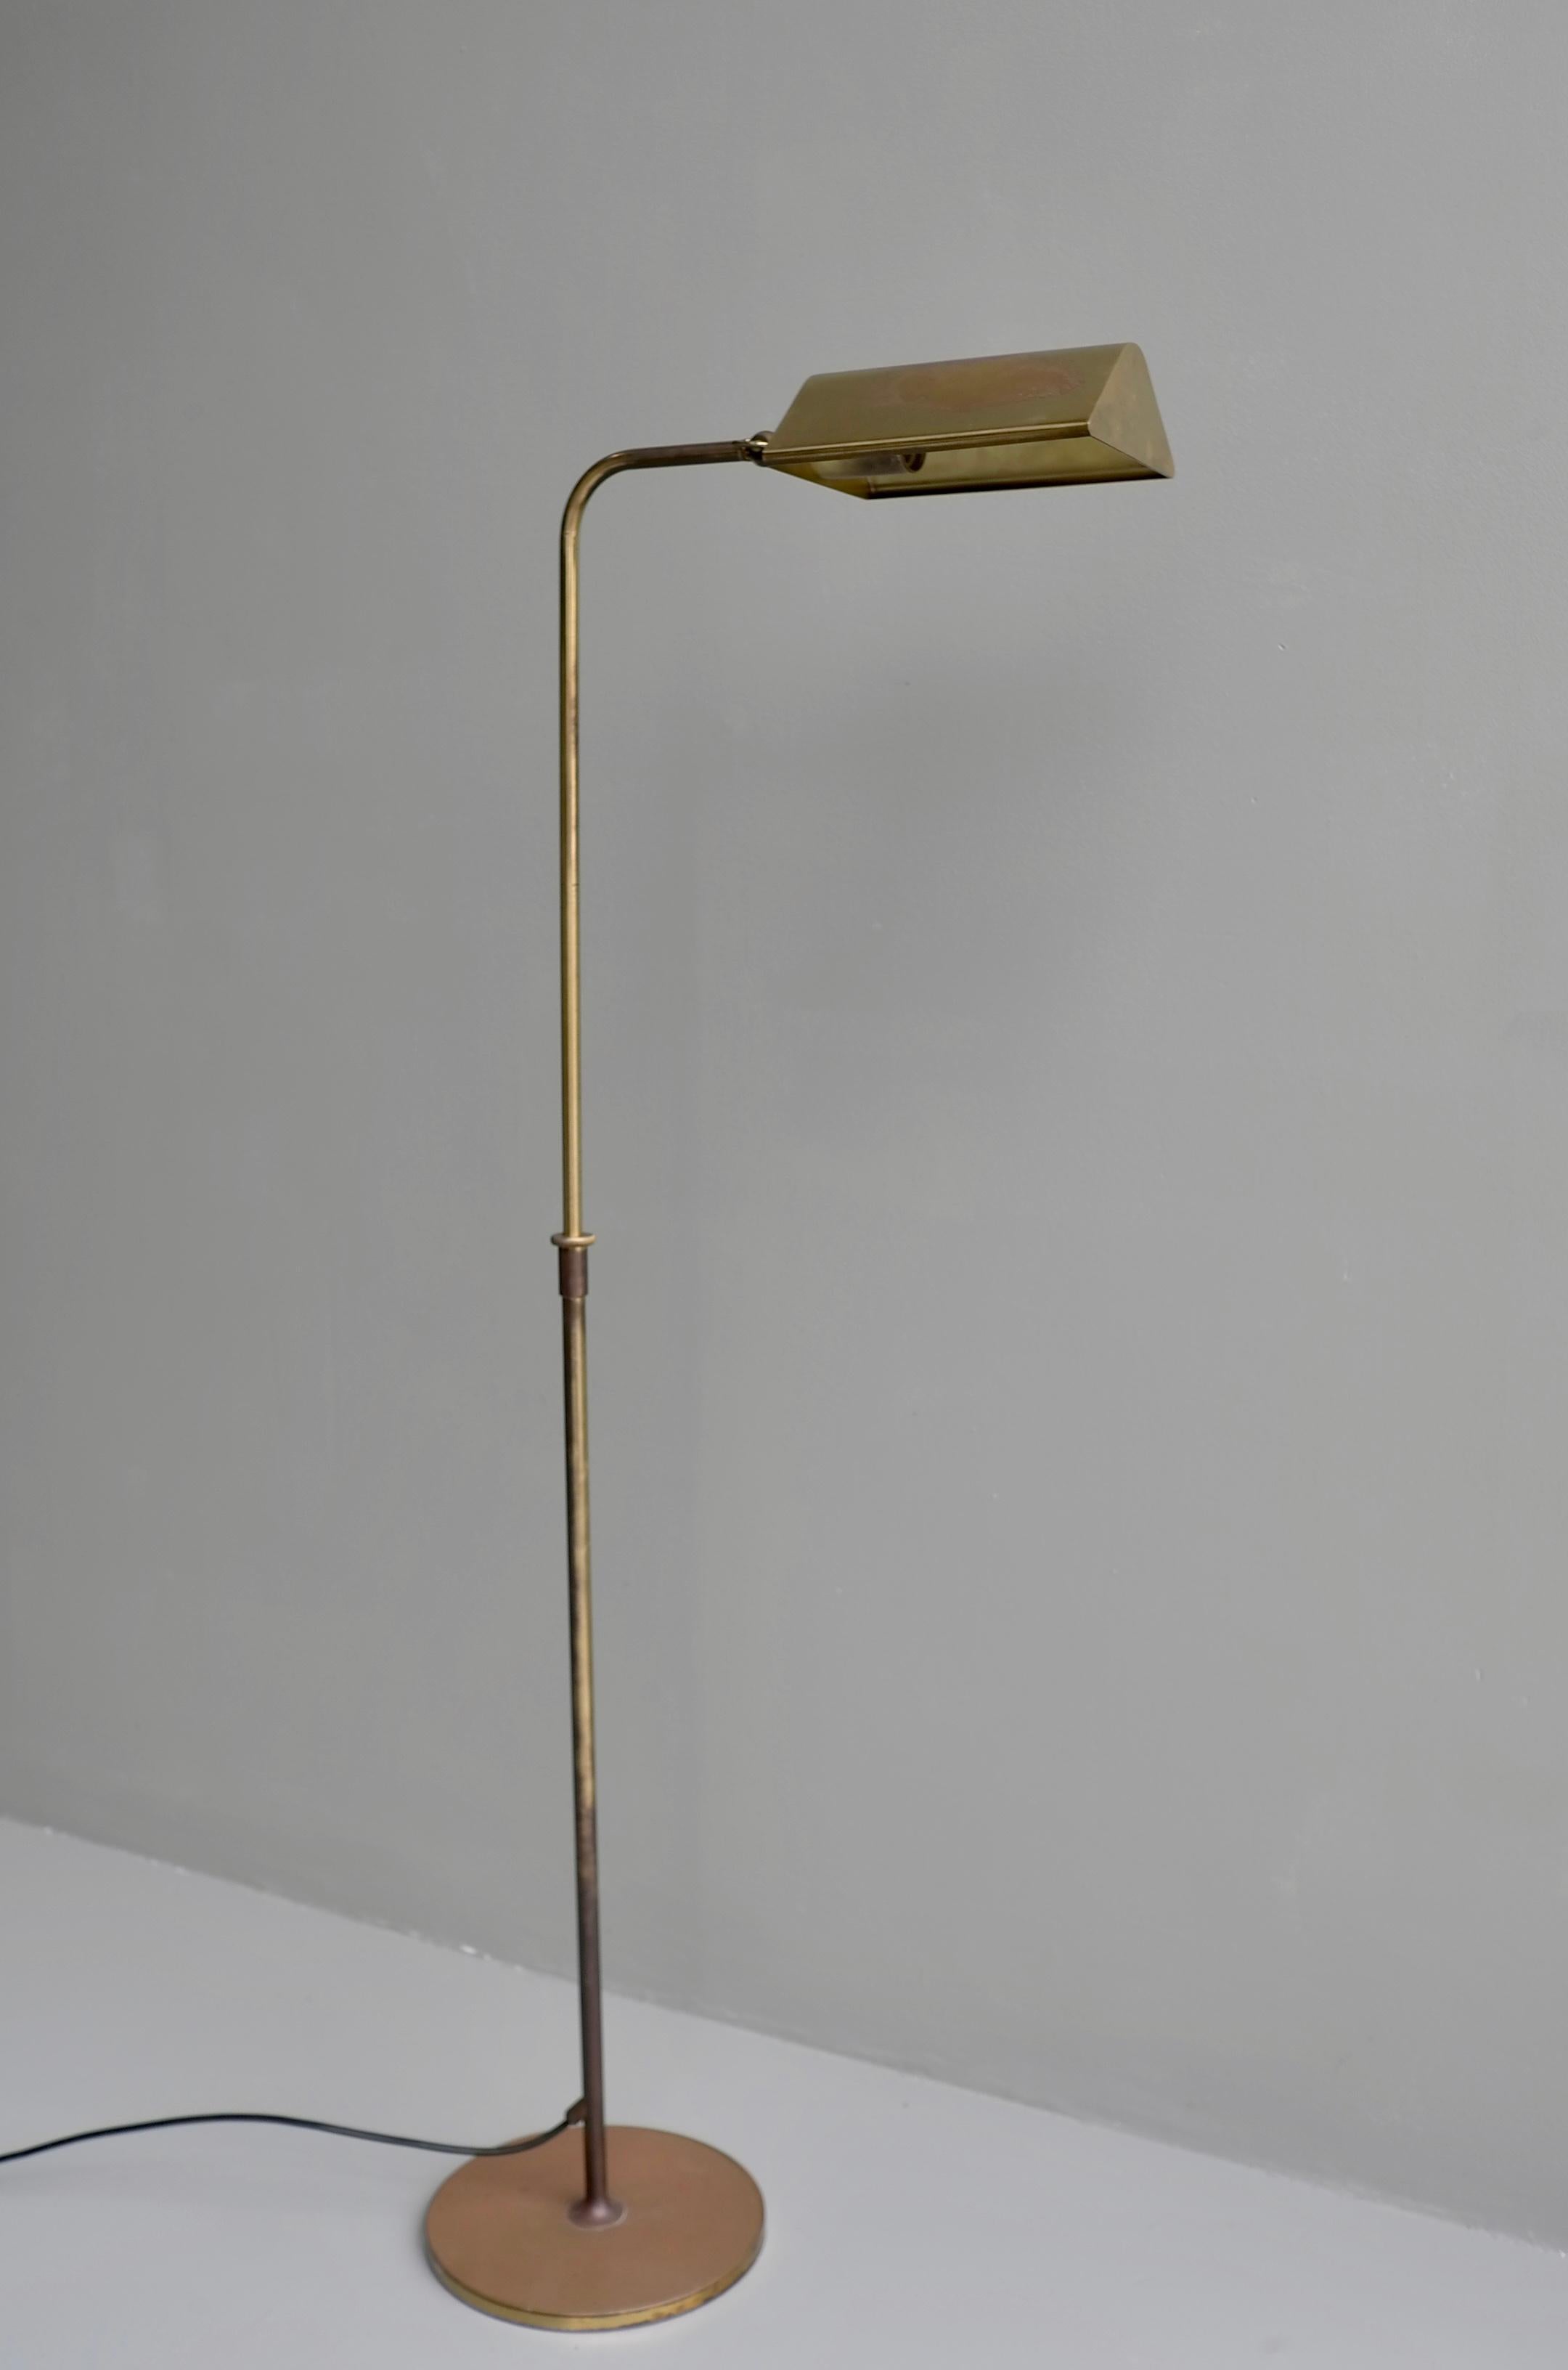 German Florian Schulz Adjustable Copper and Brass Library Floor Lamp with Patina For Sale